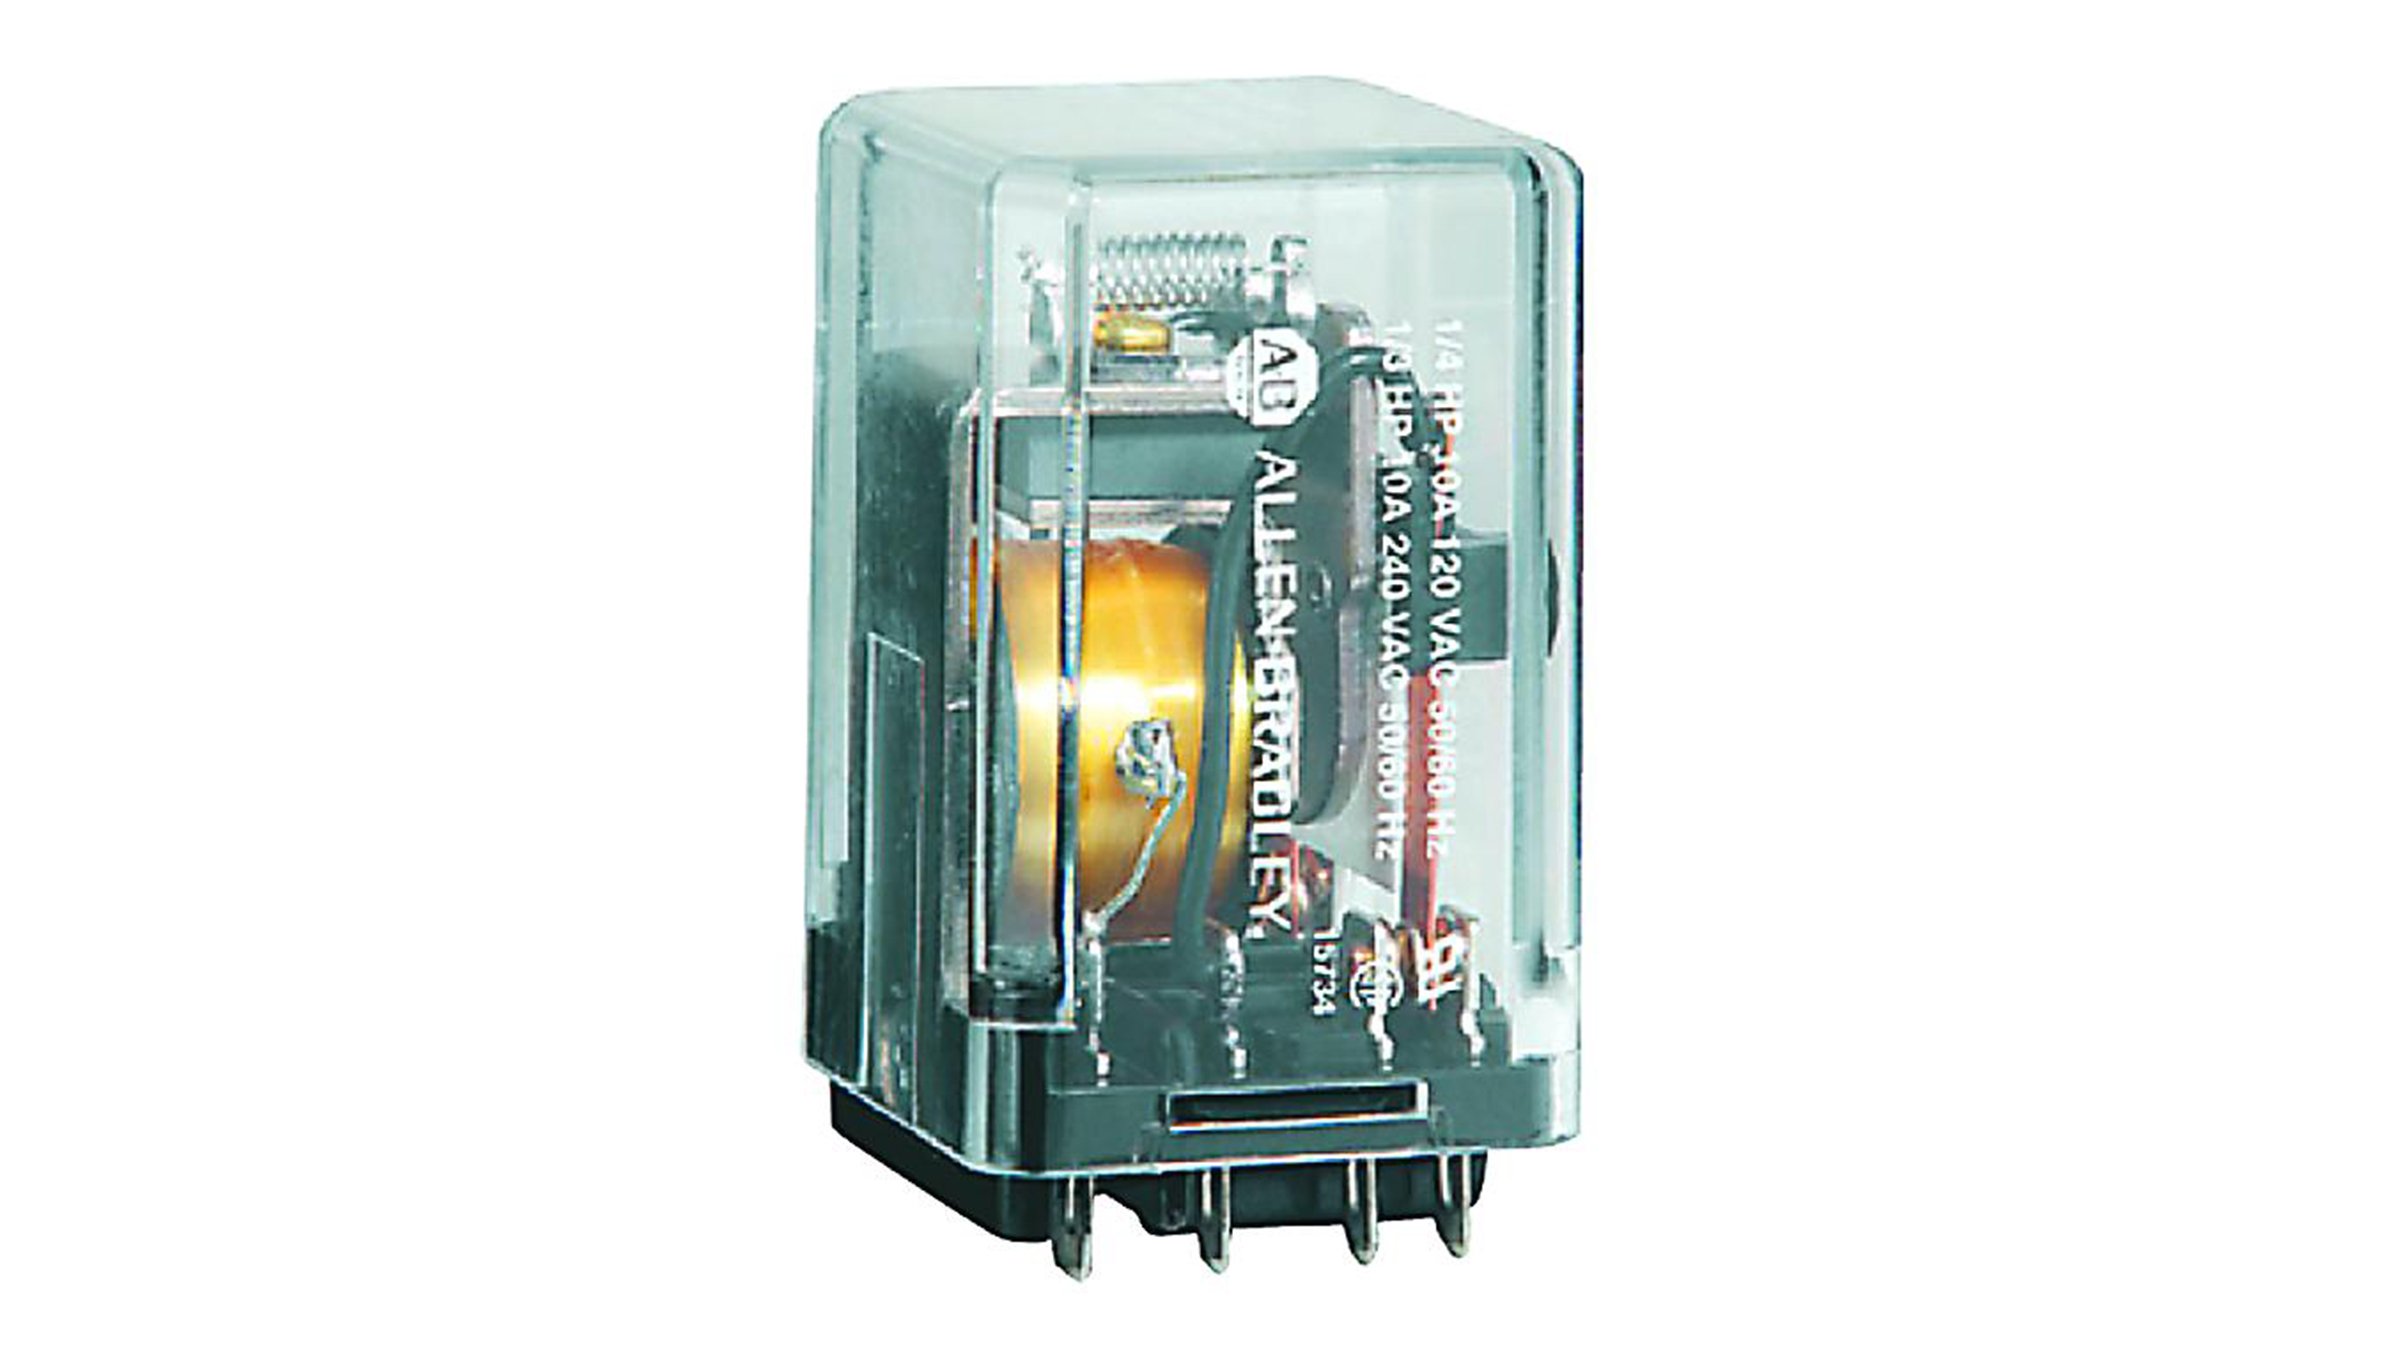 Allen-Bradley Bulletin 700-HJ Magnetic Latching Relays control lighting loads or continuous duty applications to save energy.